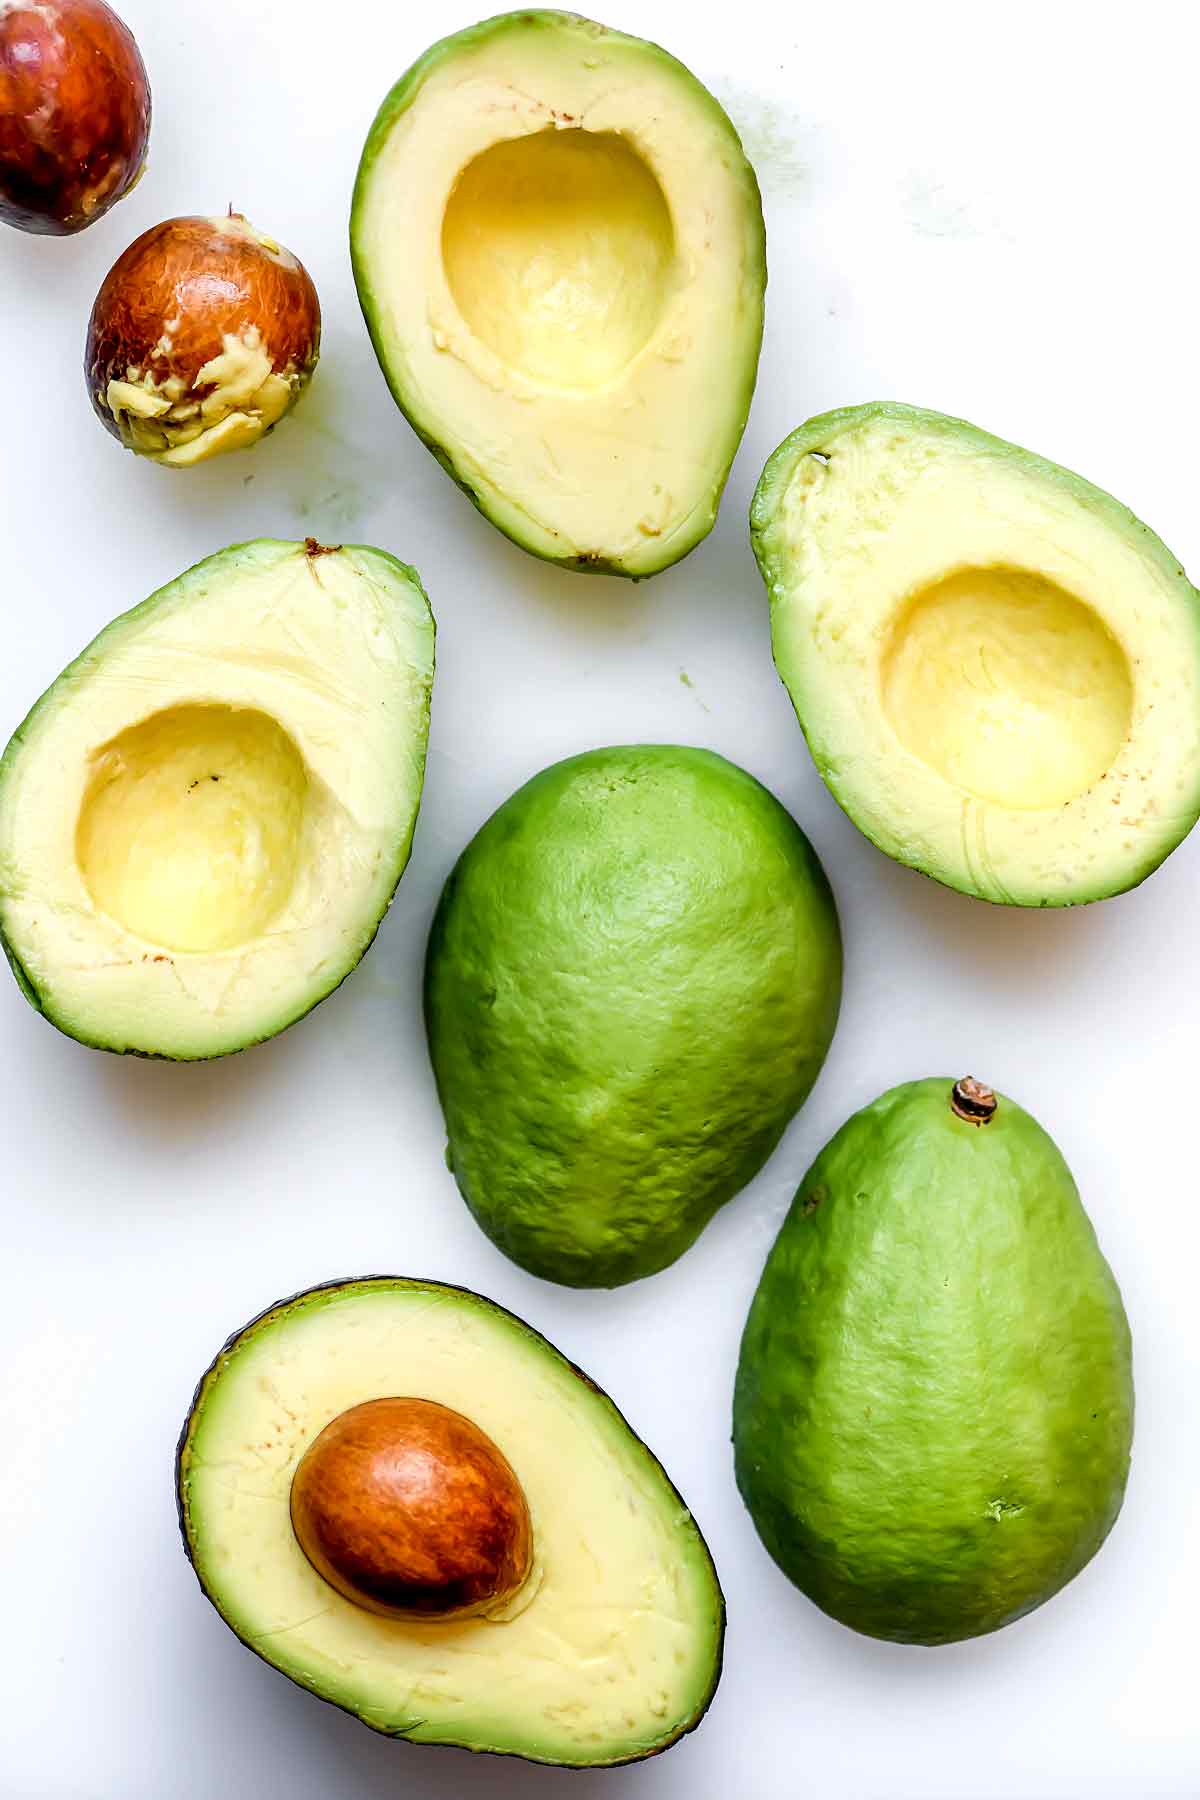 How long can a cut avocado last in the fridge How To Ripen Avocados Perfectly Foodiecrush Com